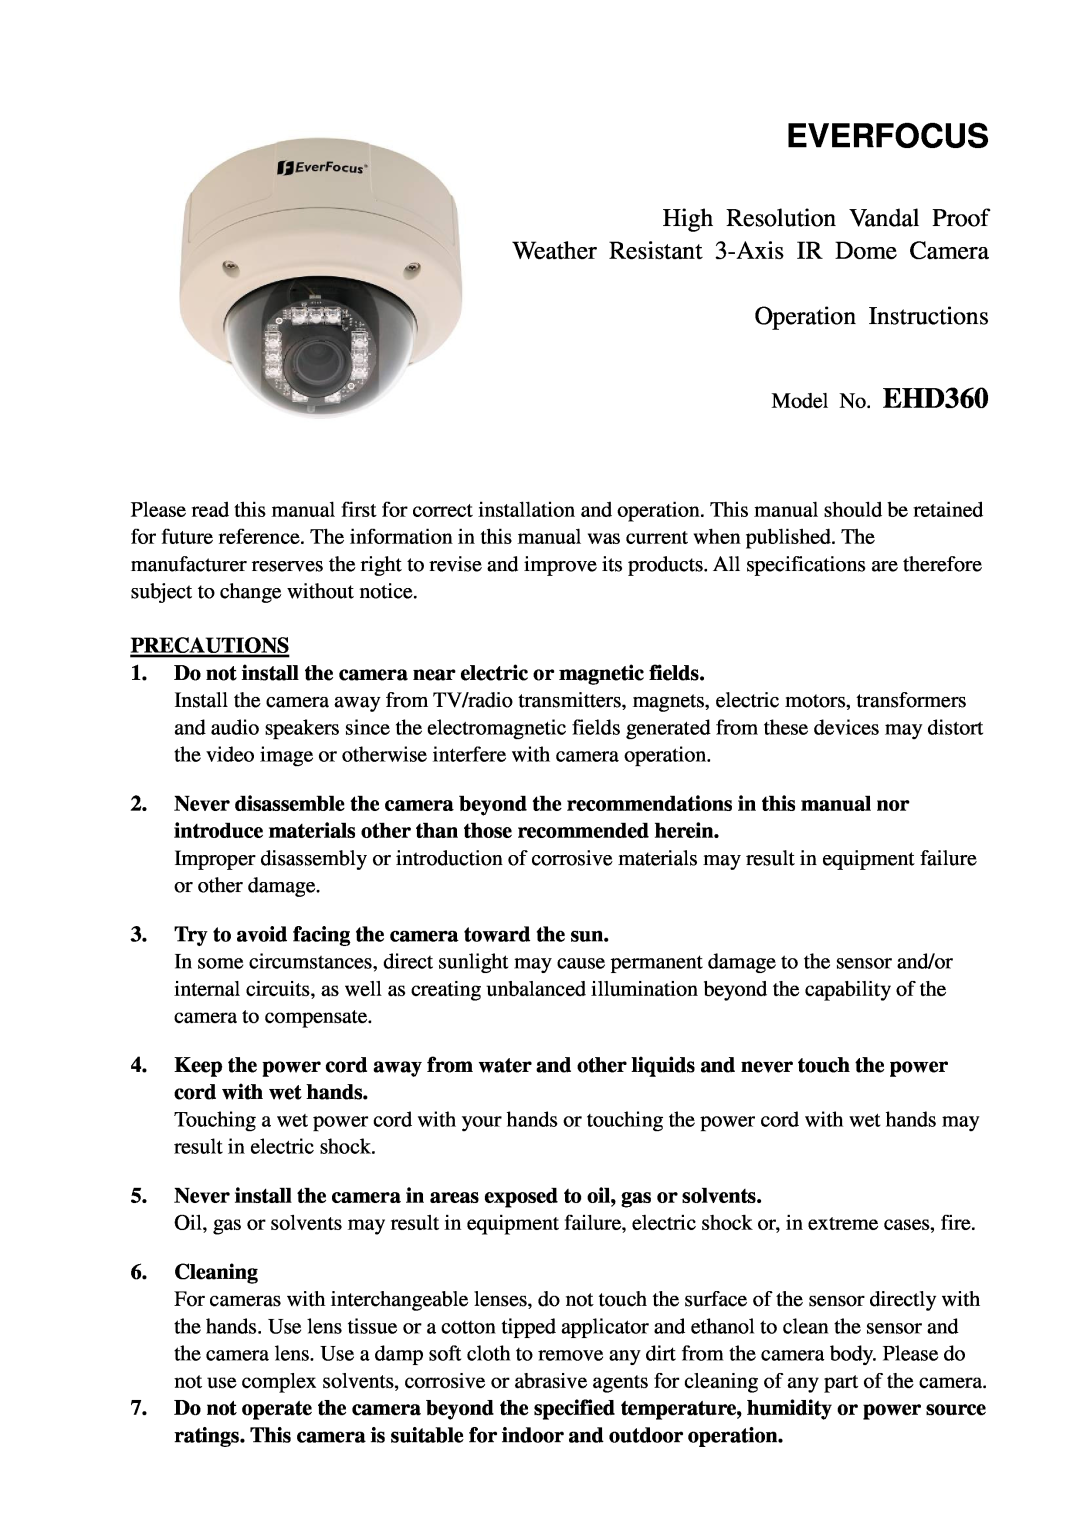 EverFocus EHD360 specifications High Resolution Vandal Proof Weather Resistant 3-Axis IR Dome Camera, Precautions 